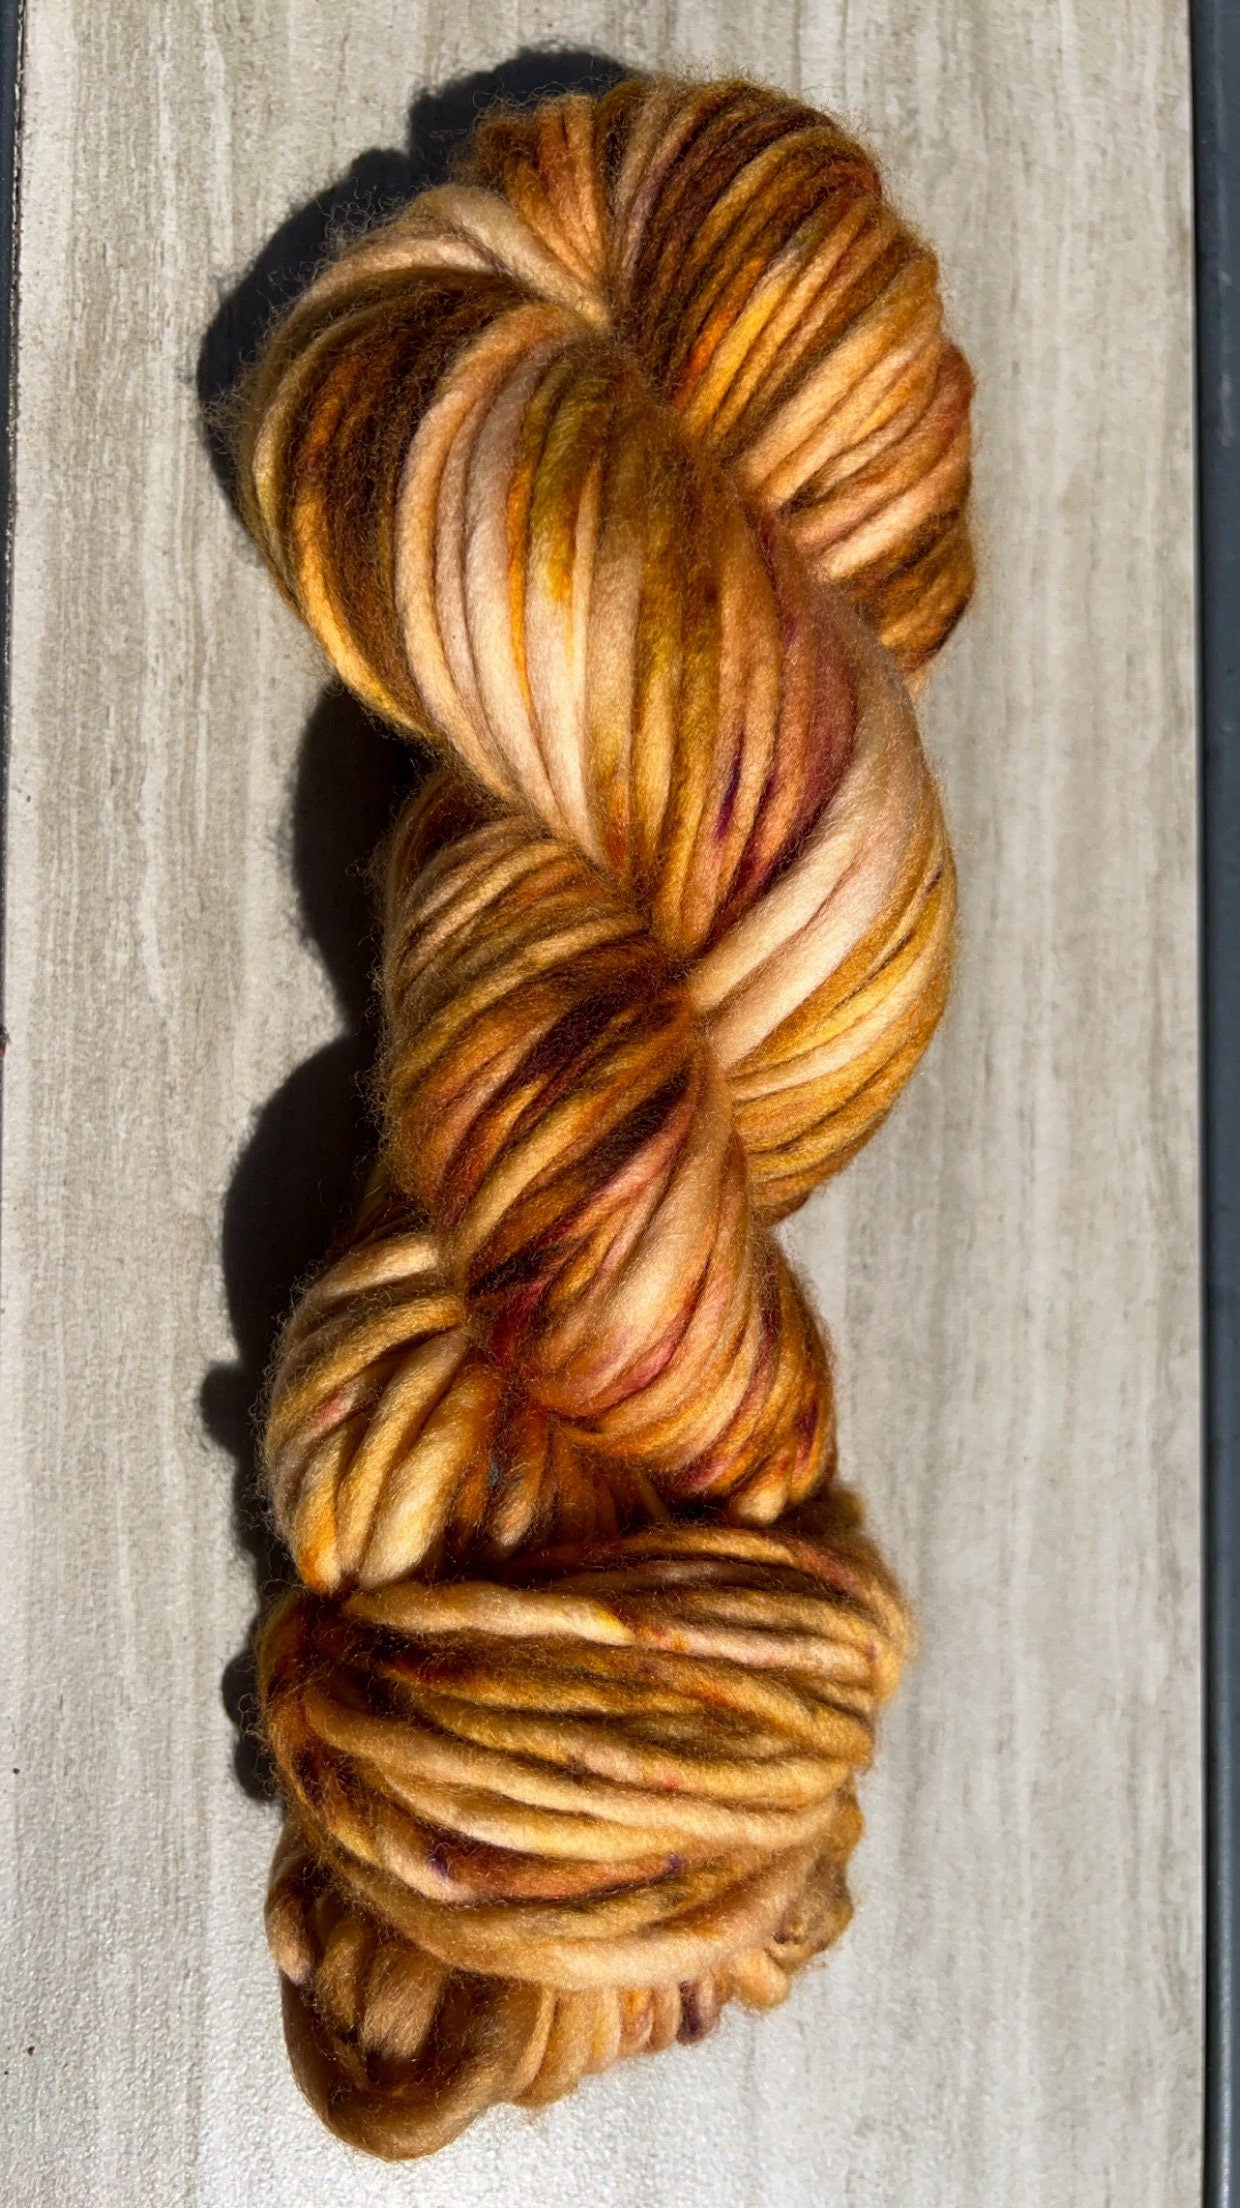 Hand dyed yarn | super bulky yarn | hand dyed merino wool yarn | indie dyed wool | Campfire S’mores